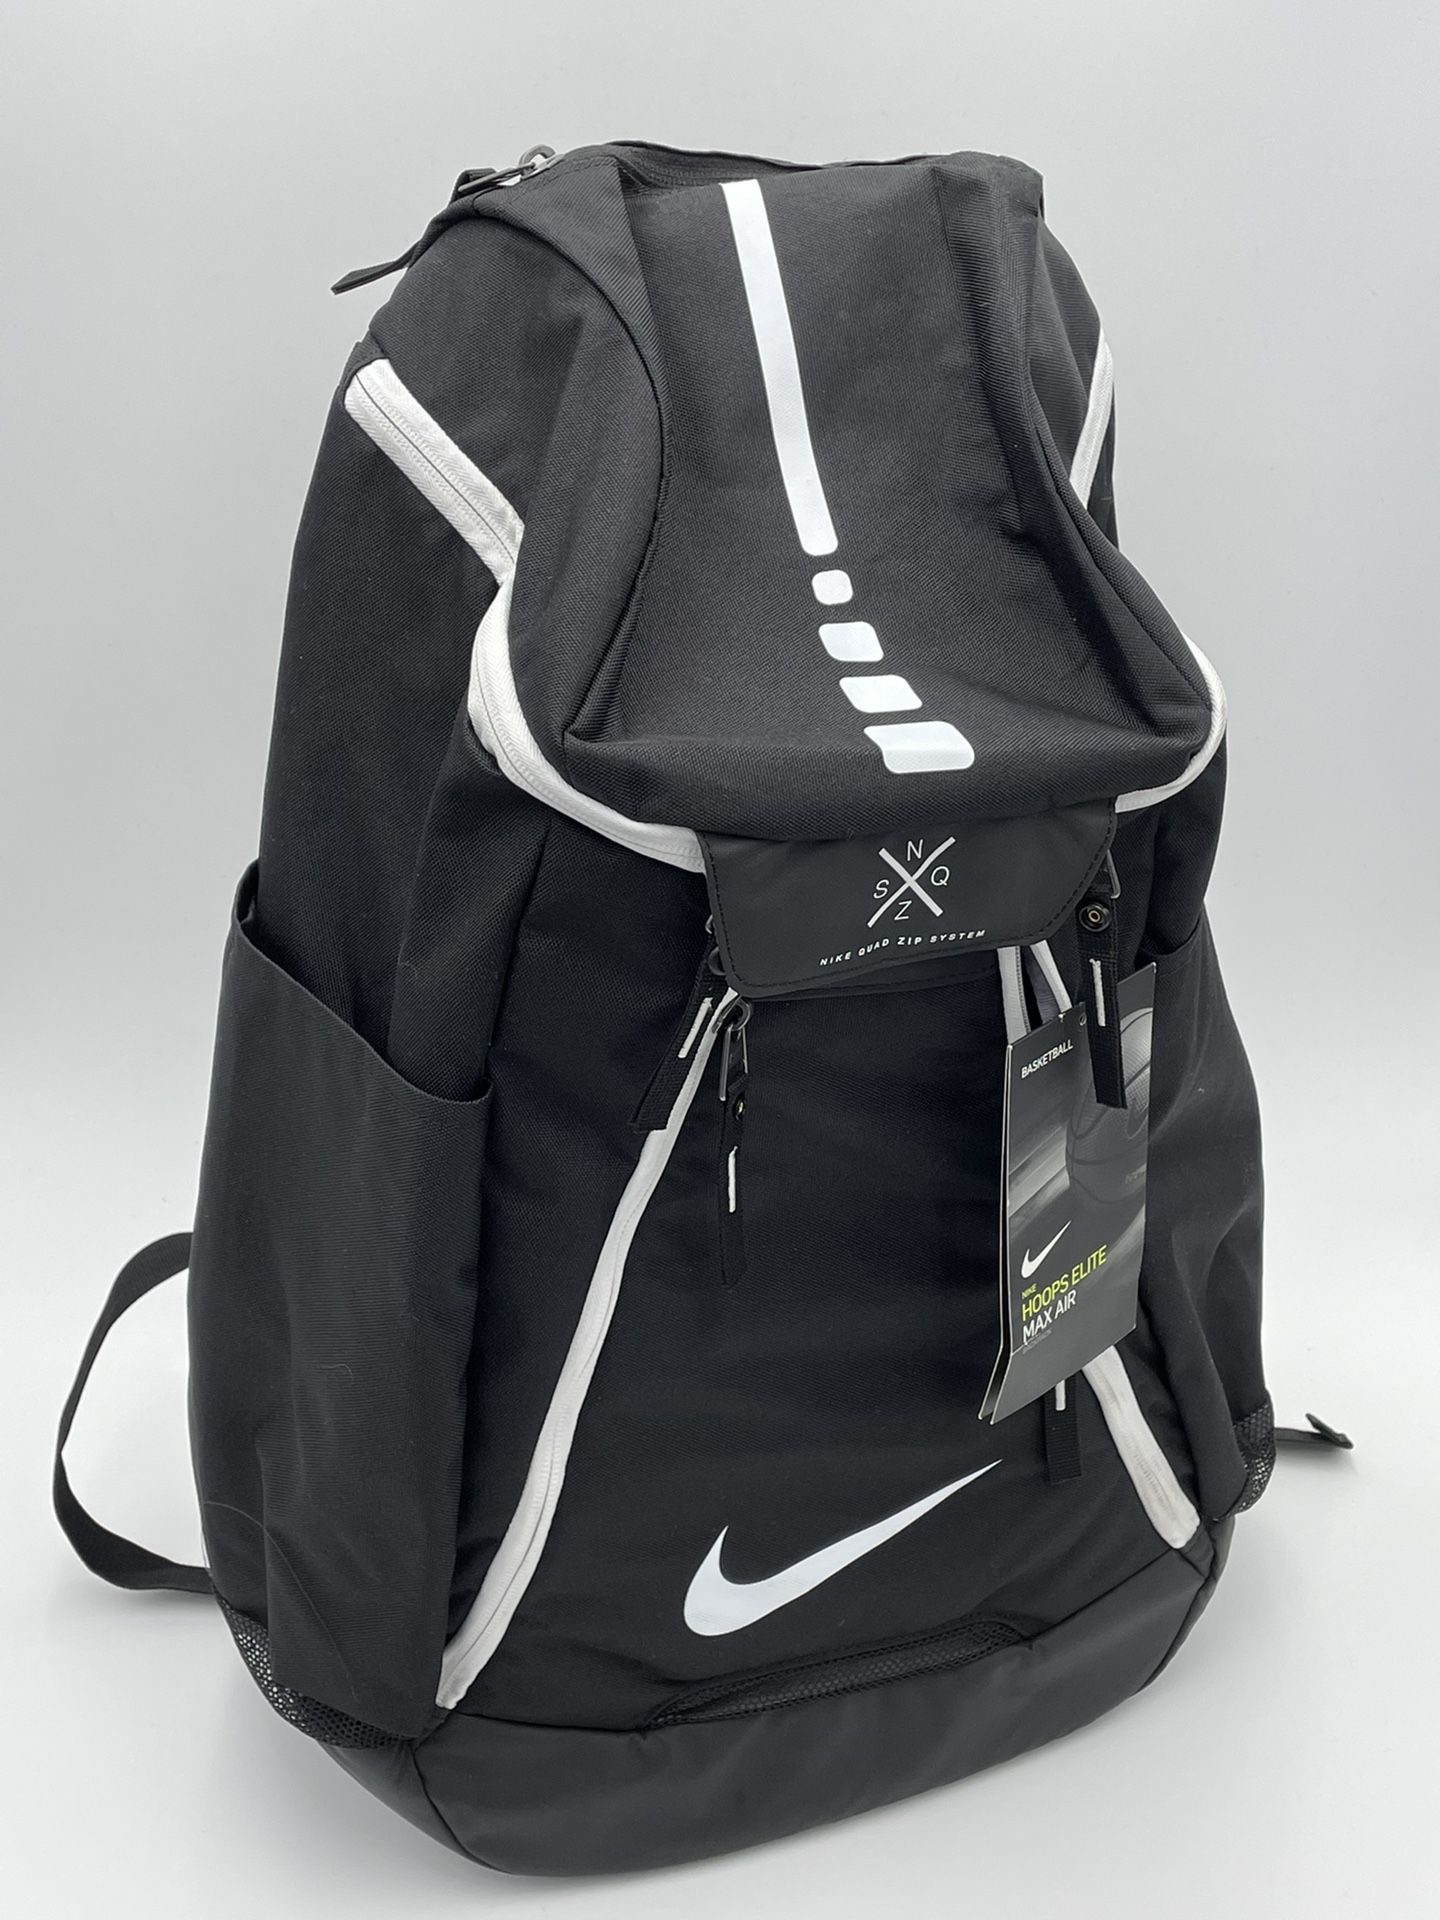 Comercio alfombra Litoral Nike Hoops Elite Max Air Team 2.0 Backpack - Black White -CK0918 010 -NEW-  for Sale in Perris, CA - OfferUp